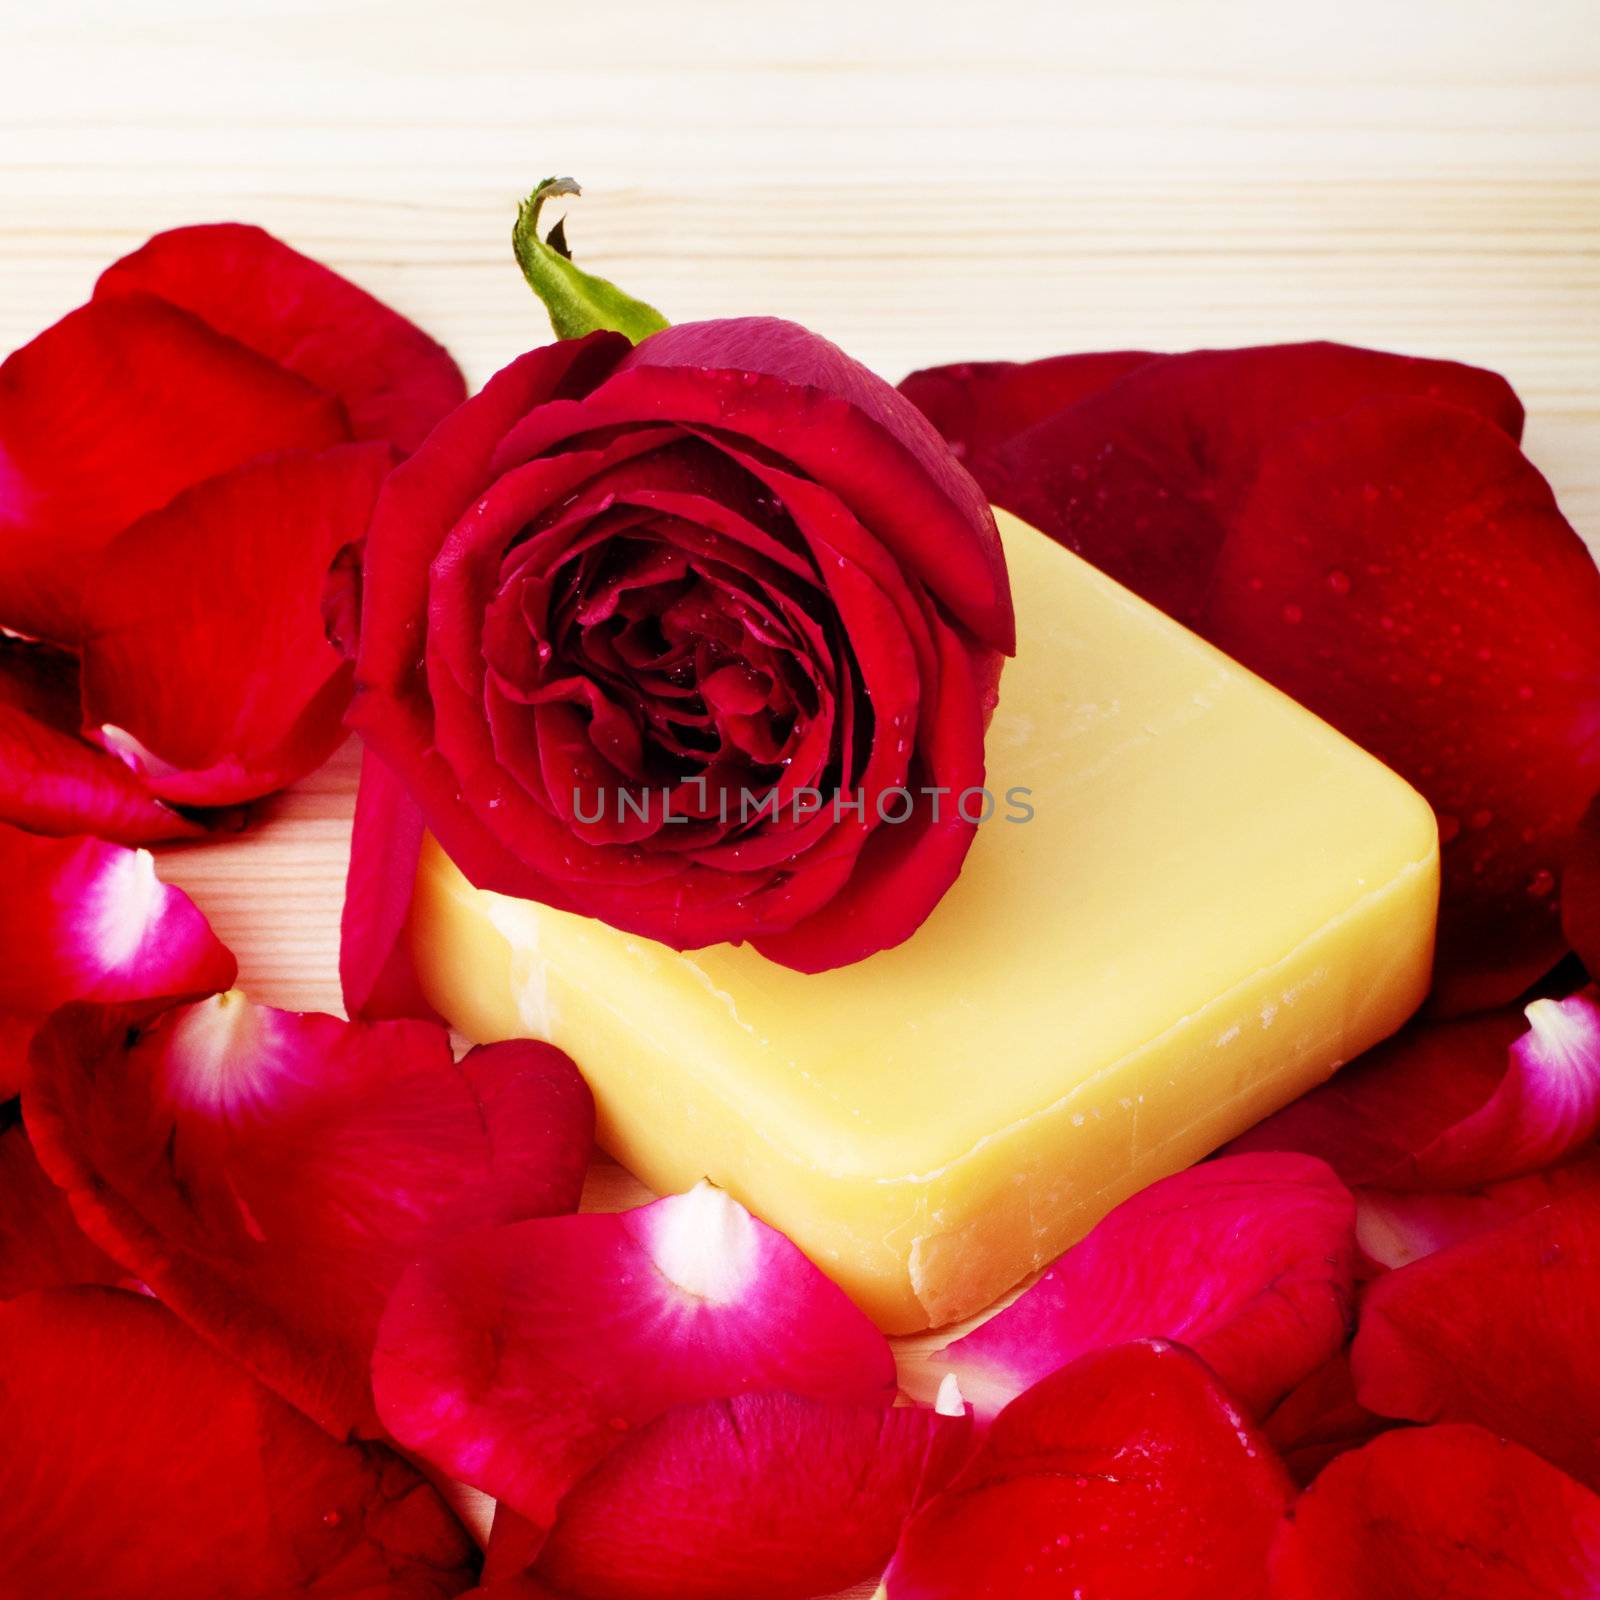 Red rose and soap. Bathroom or wellness background.